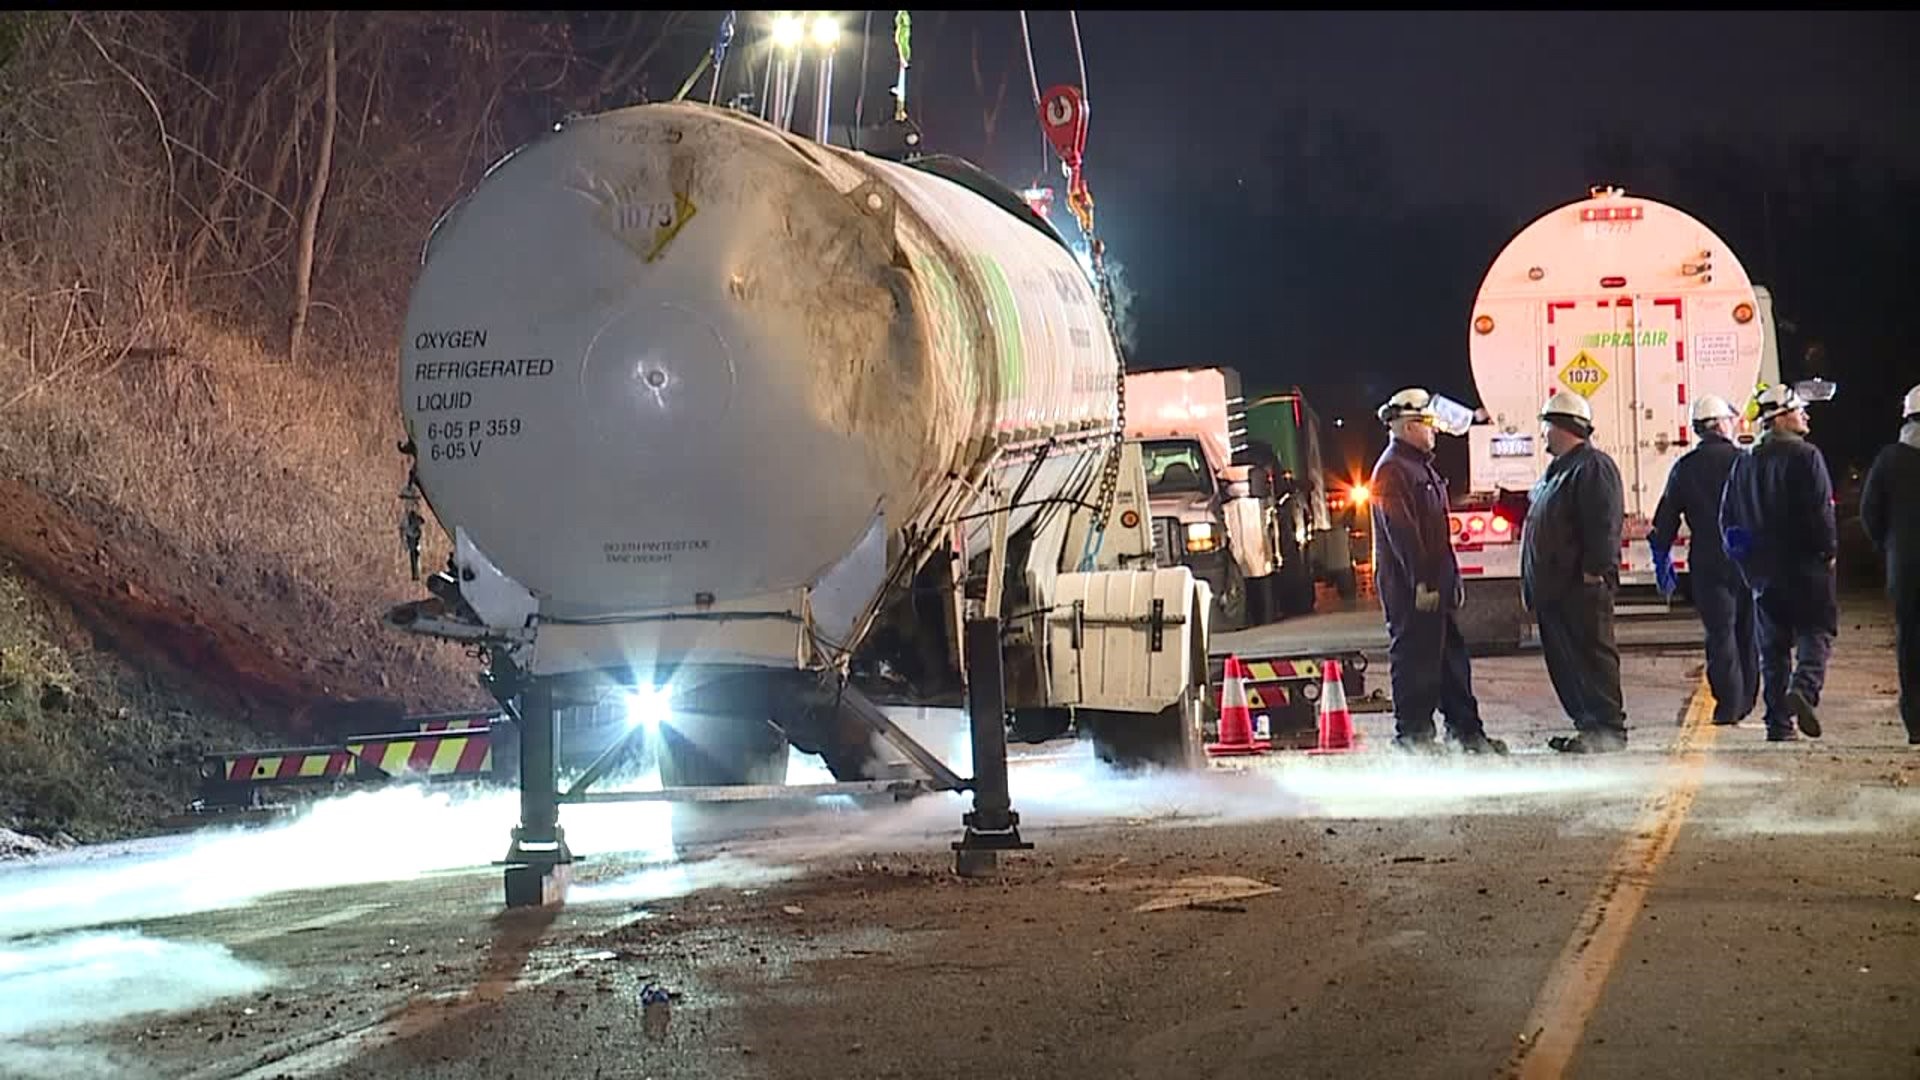 Tanker carrying liquid oxygen crashes & shuts down I-83 in Southern York County for hours